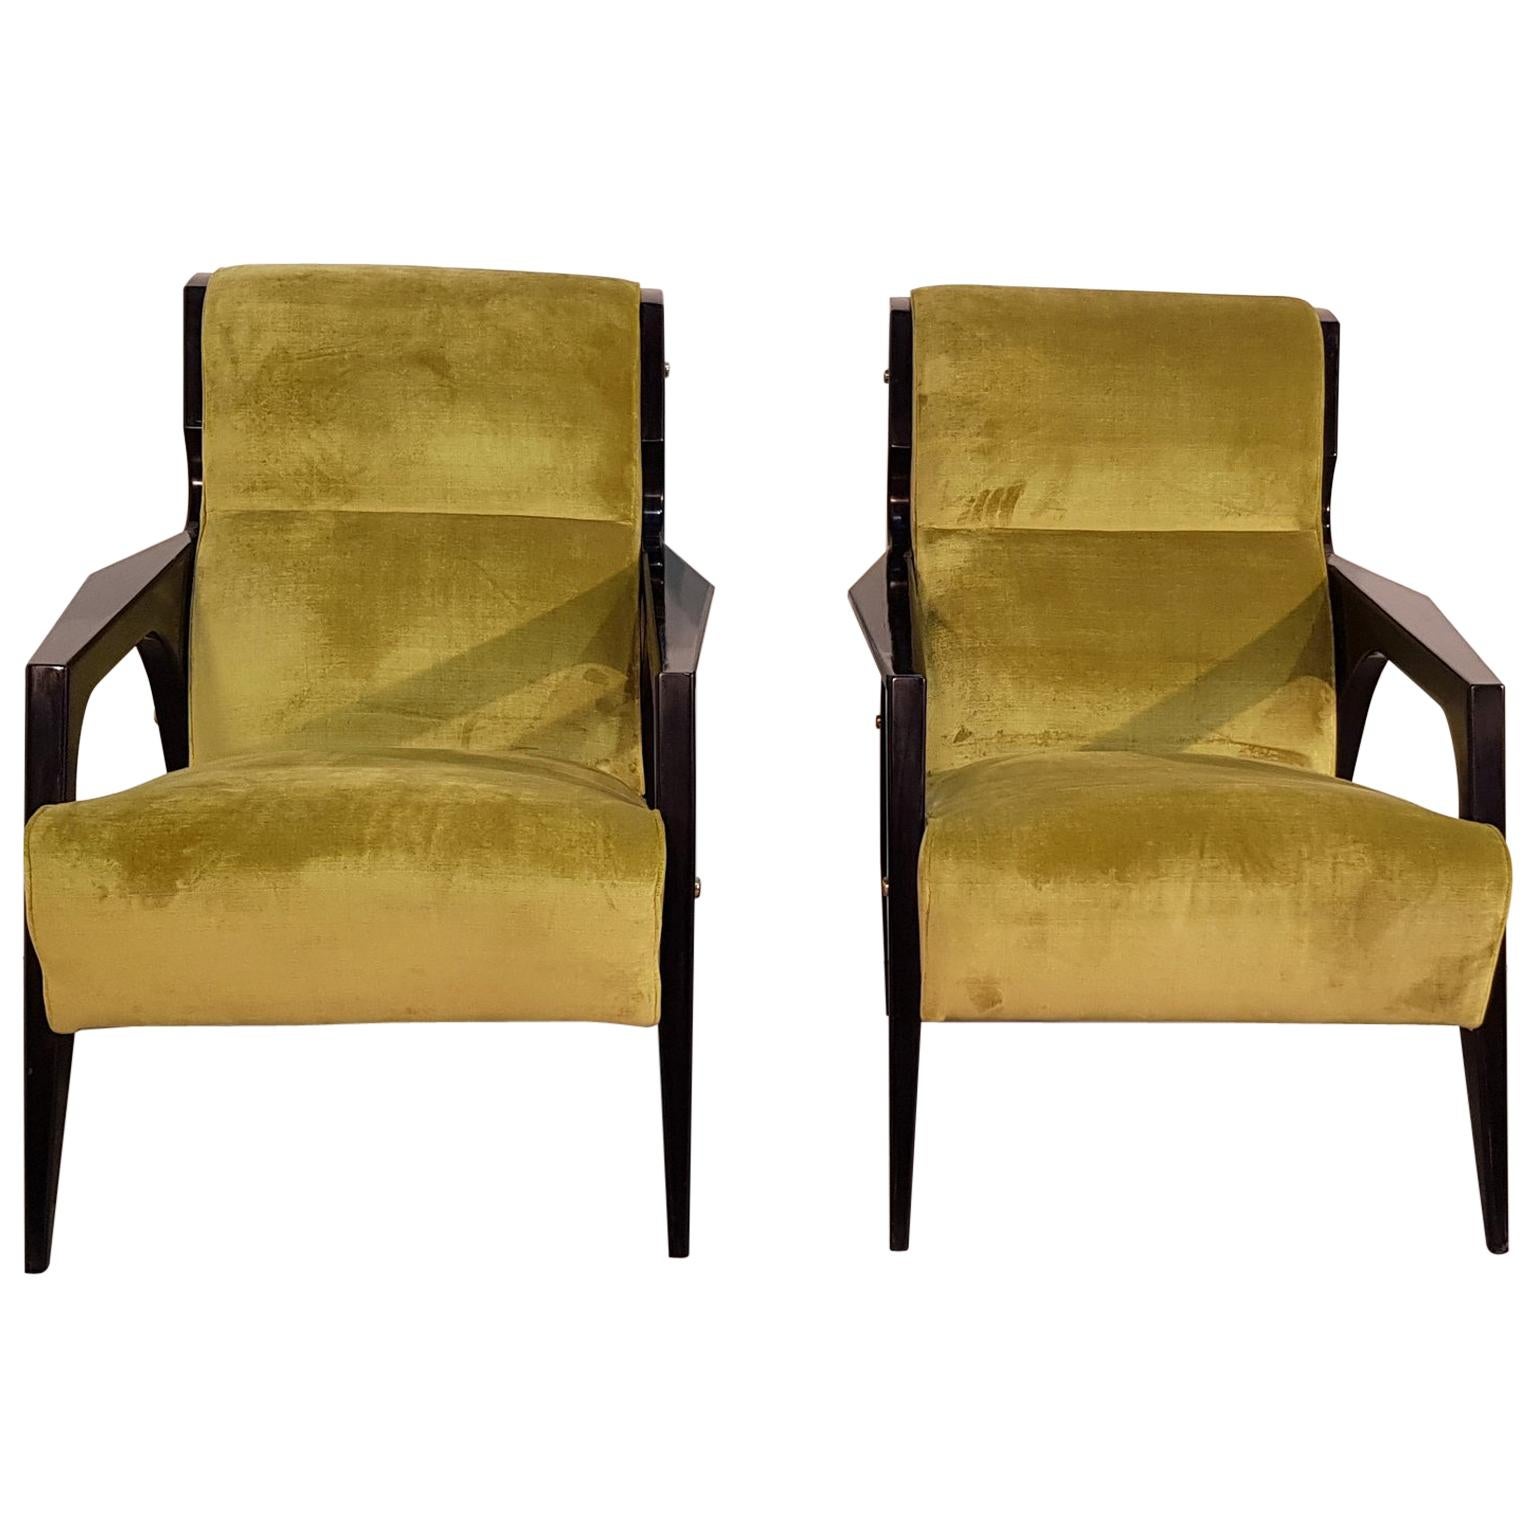 Pair of Italian Midcentury Green Upholstered Armchairs by Gio Ponti, 1950s For Sale